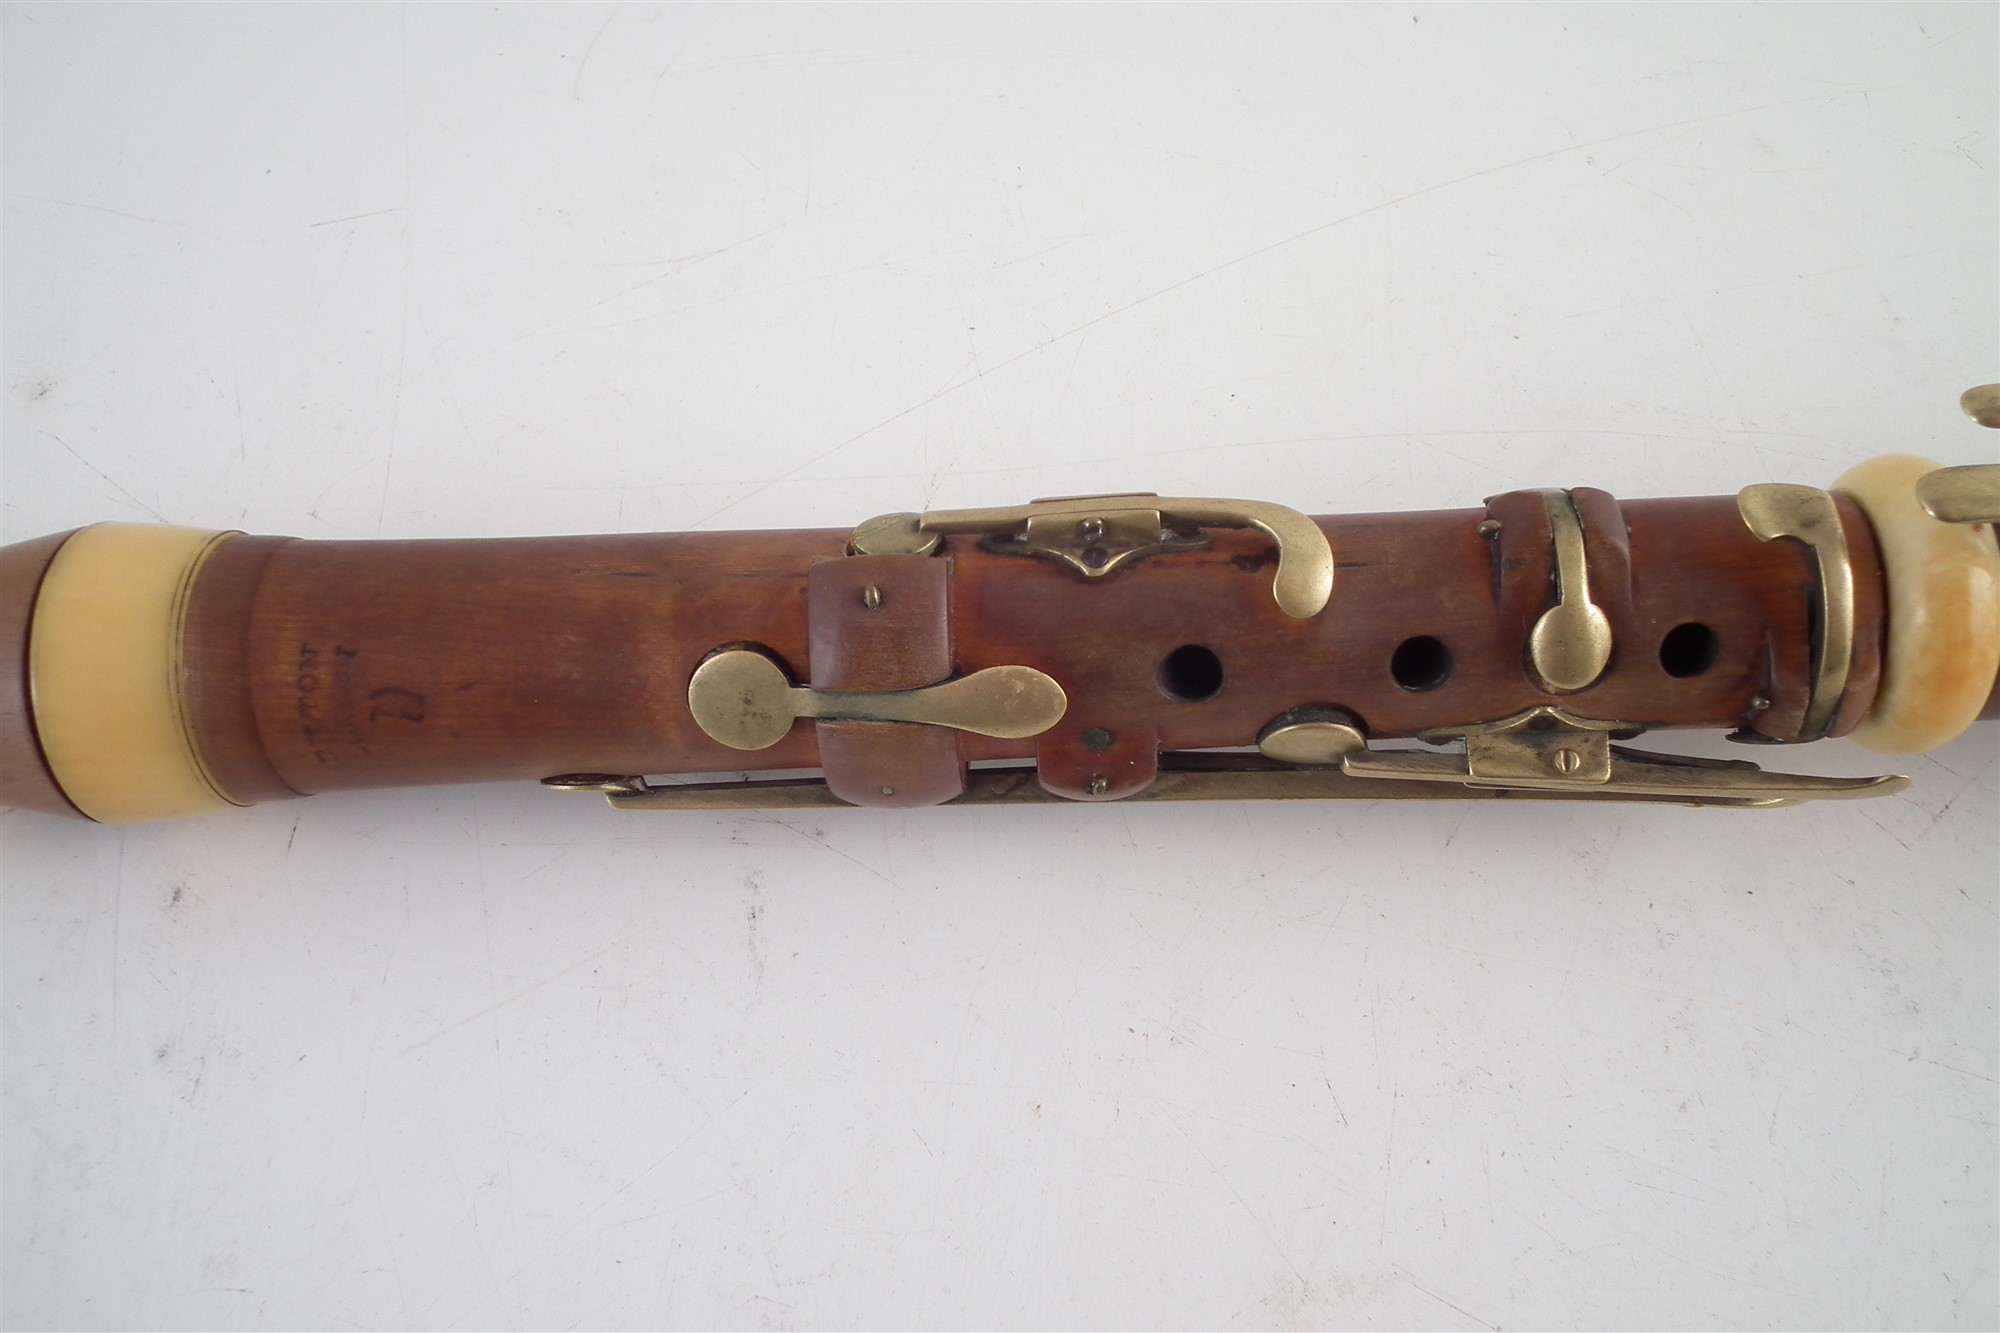 Boxwood and ivory clarinet by Bilton, stamped with 93 Westminster Bridge Road London address, with - Image 4 of 9